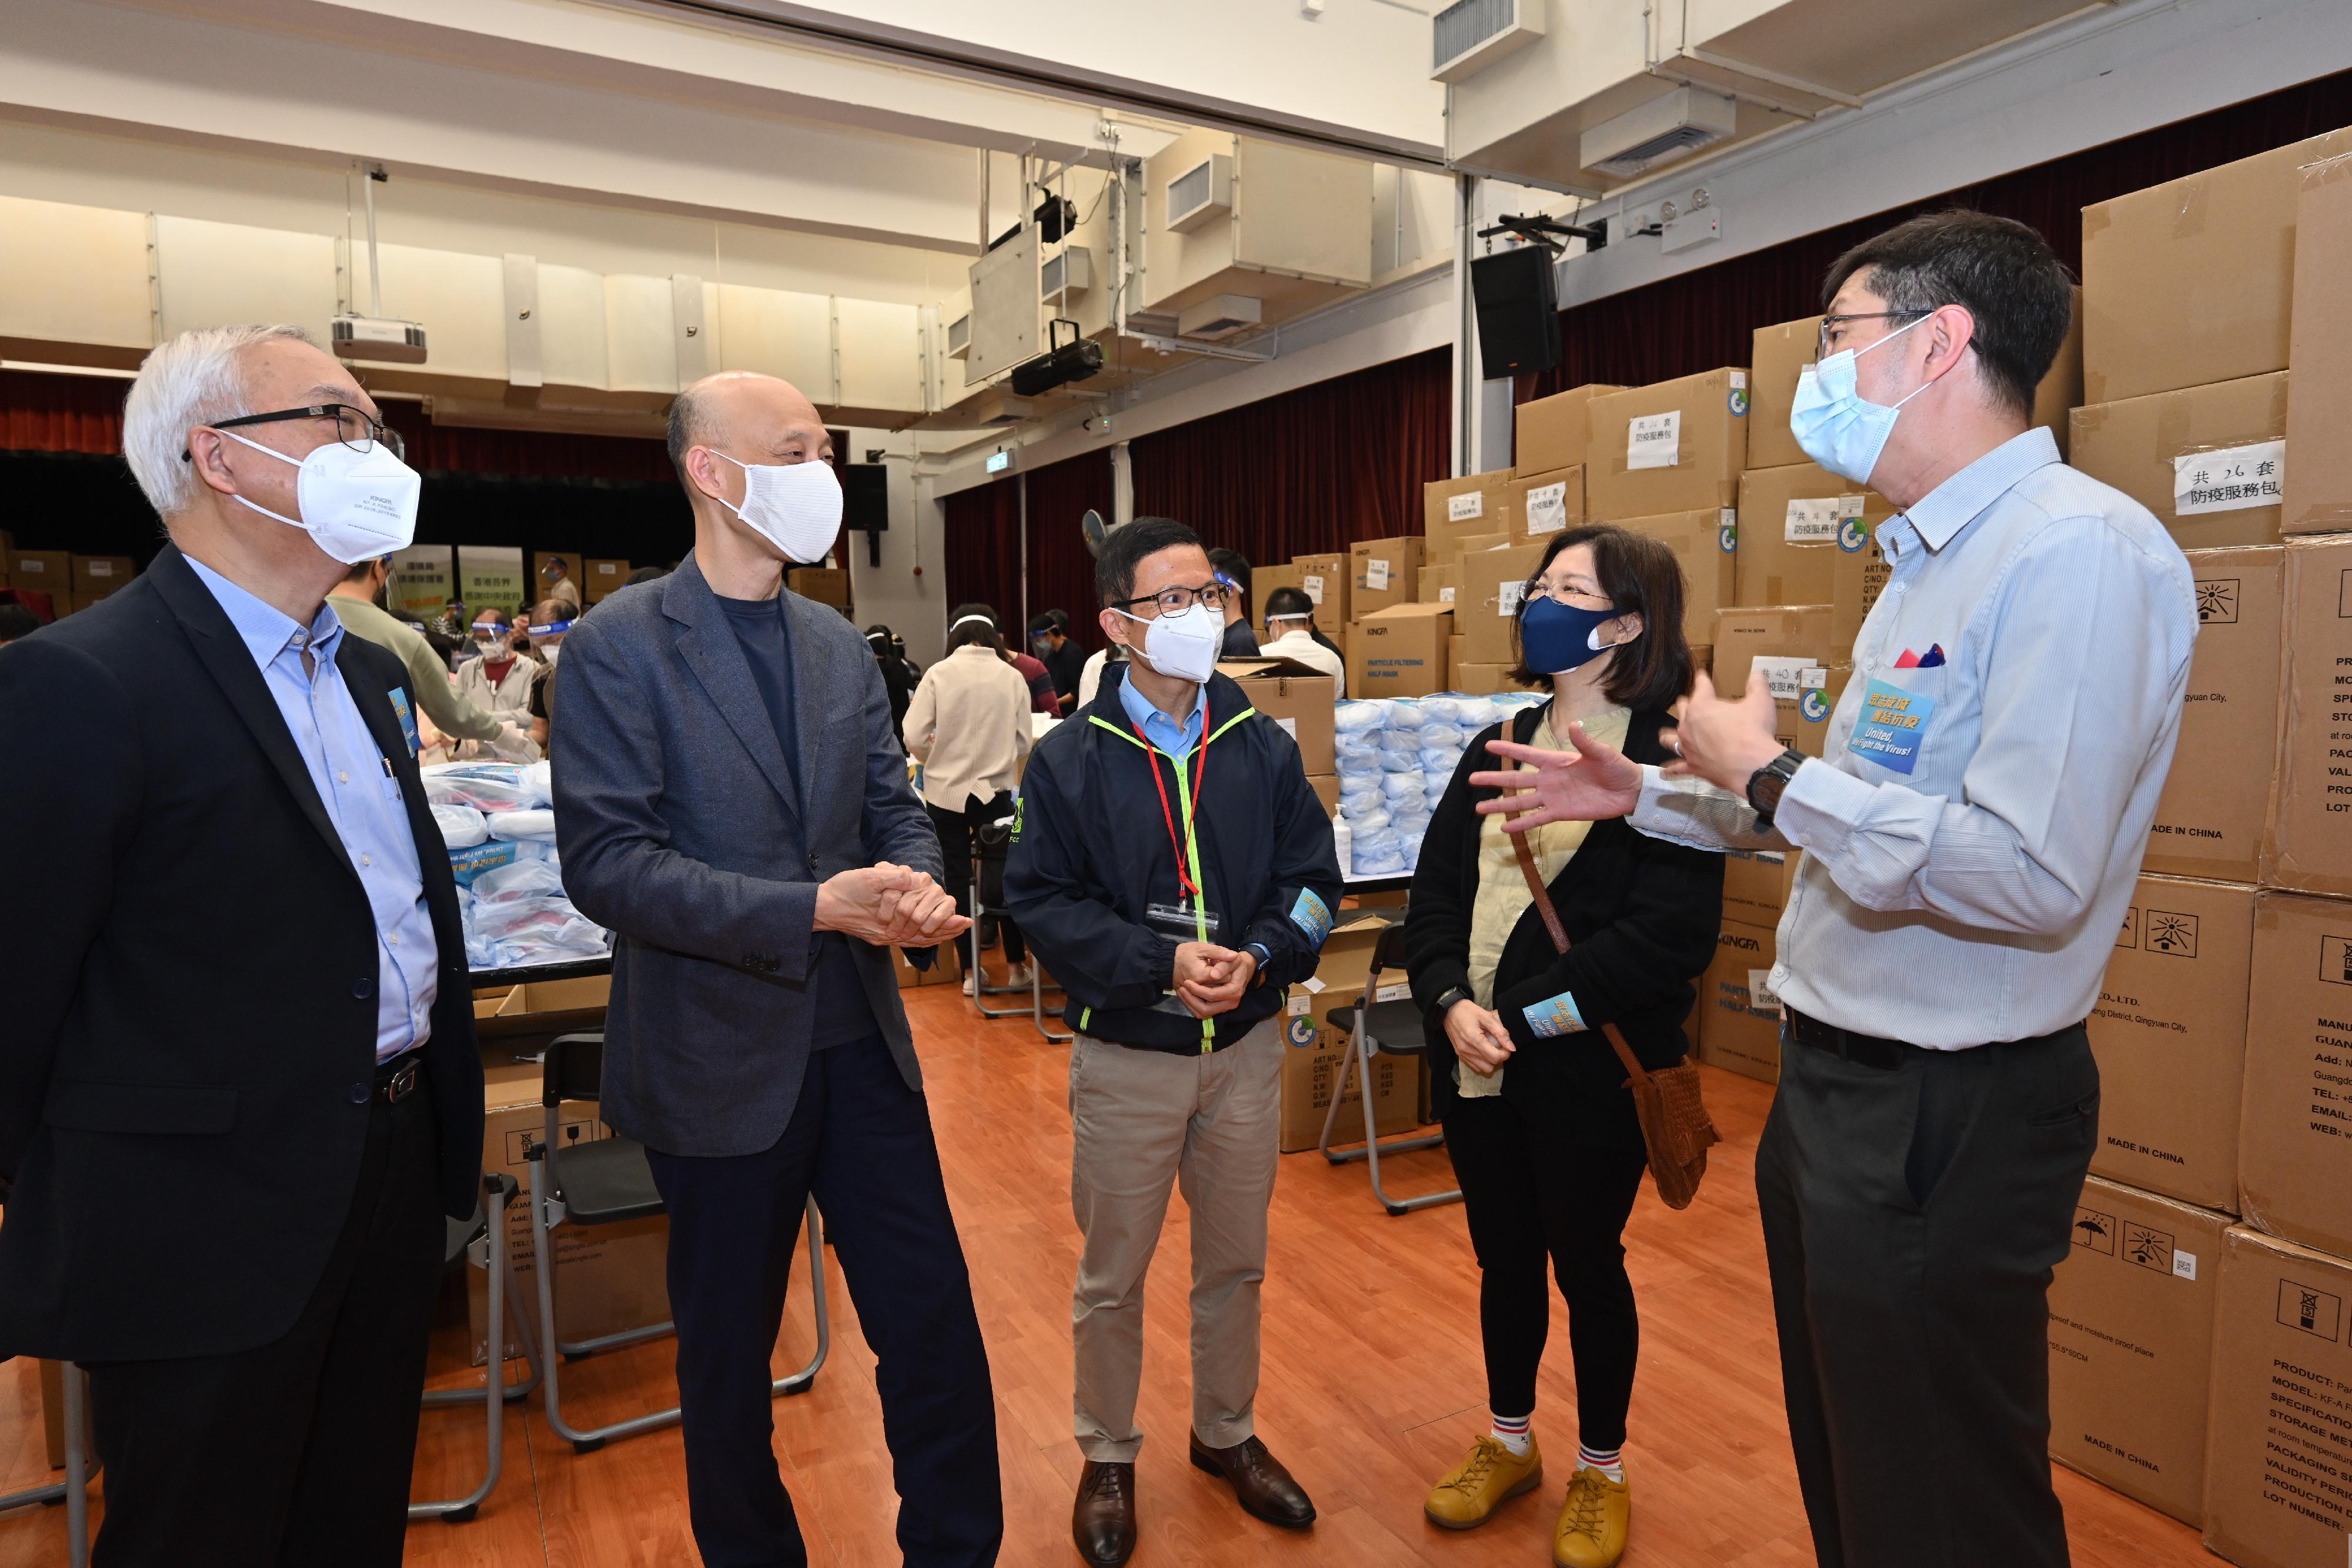 The Secretary for the Environment, Mr Wong Kam-sing, today (March 30) visits the Kwai Fong Community Hall to participate in the packing of anti-epidemic service bag and show support to the Environmental Protection Department (EPD) staff at the packing centre. Picture shows Mr Wong (second left); the Permanent Secretary for the Environment/Director of Environmental Protection, Miss Janice Tse (second right); the Under Secretary for the Environment, Mr Tse Chin-wan (first left); and the District Officer (Kwai Tsing), Mr Kenneth Cheng (centre), receiving a briefing on the operation of the packing centre at Kwai Fong Community Hall from a staff of the EPD.